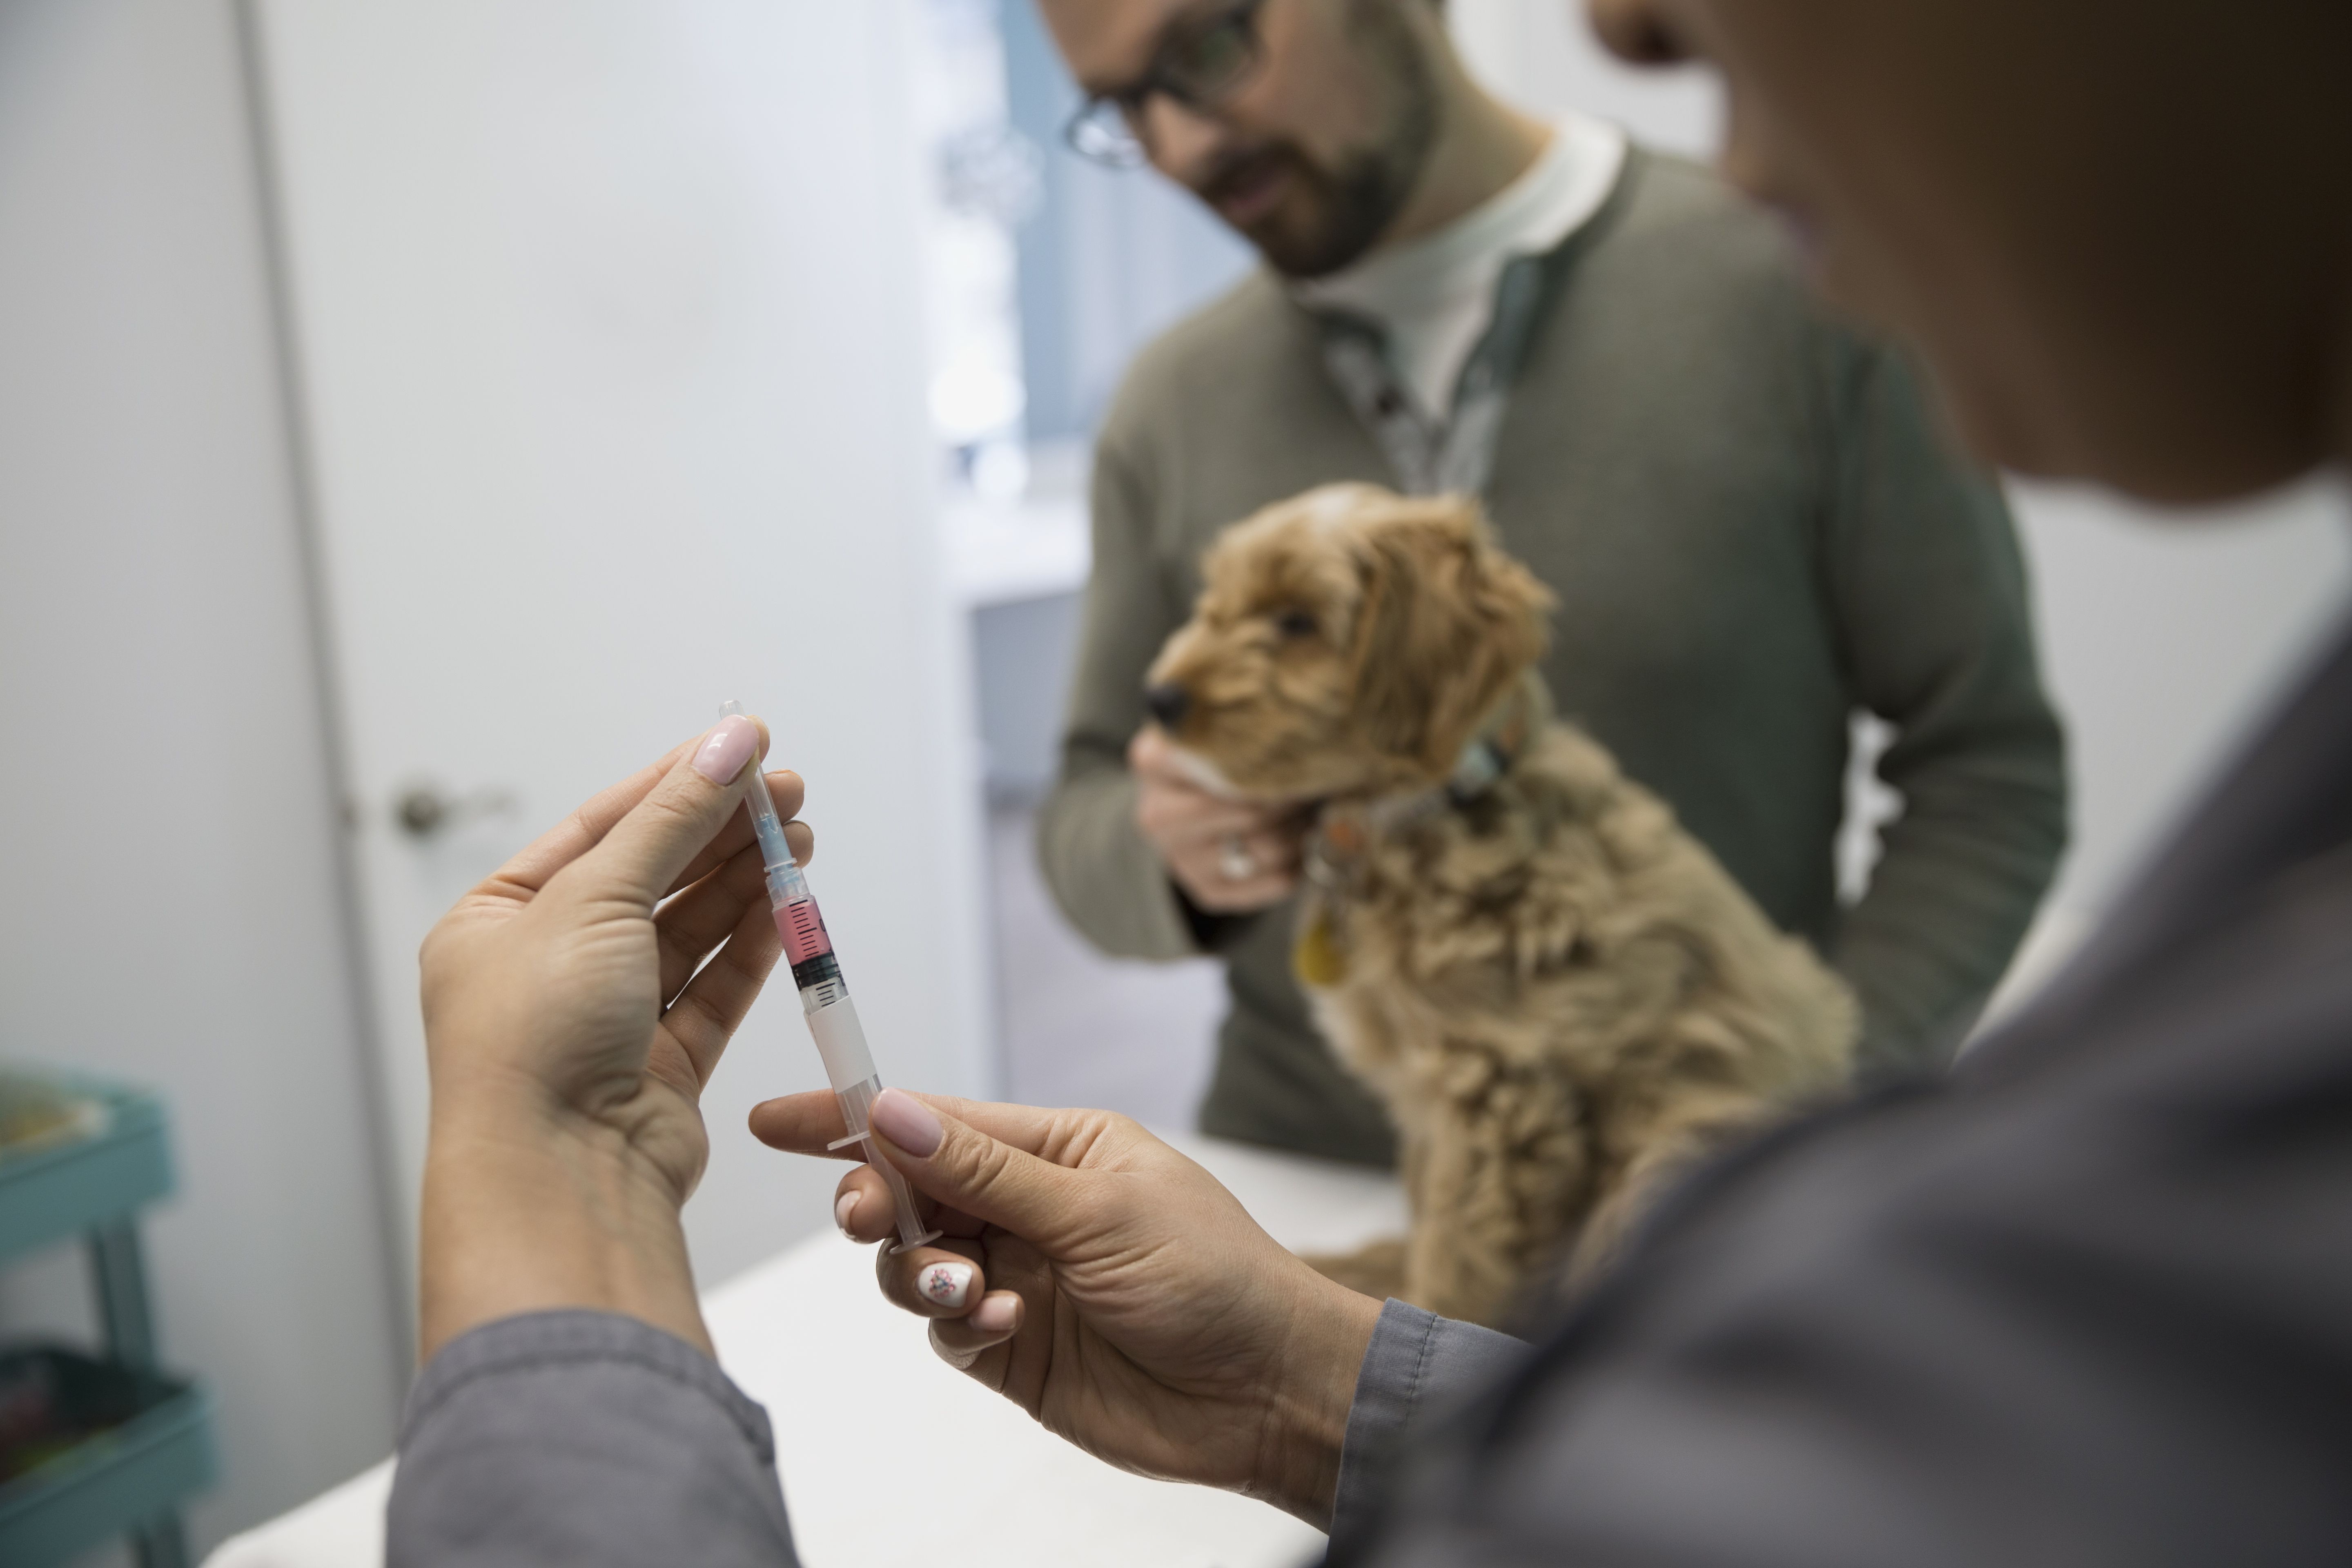 Veterinarian preparing injection for dog clinic examination room